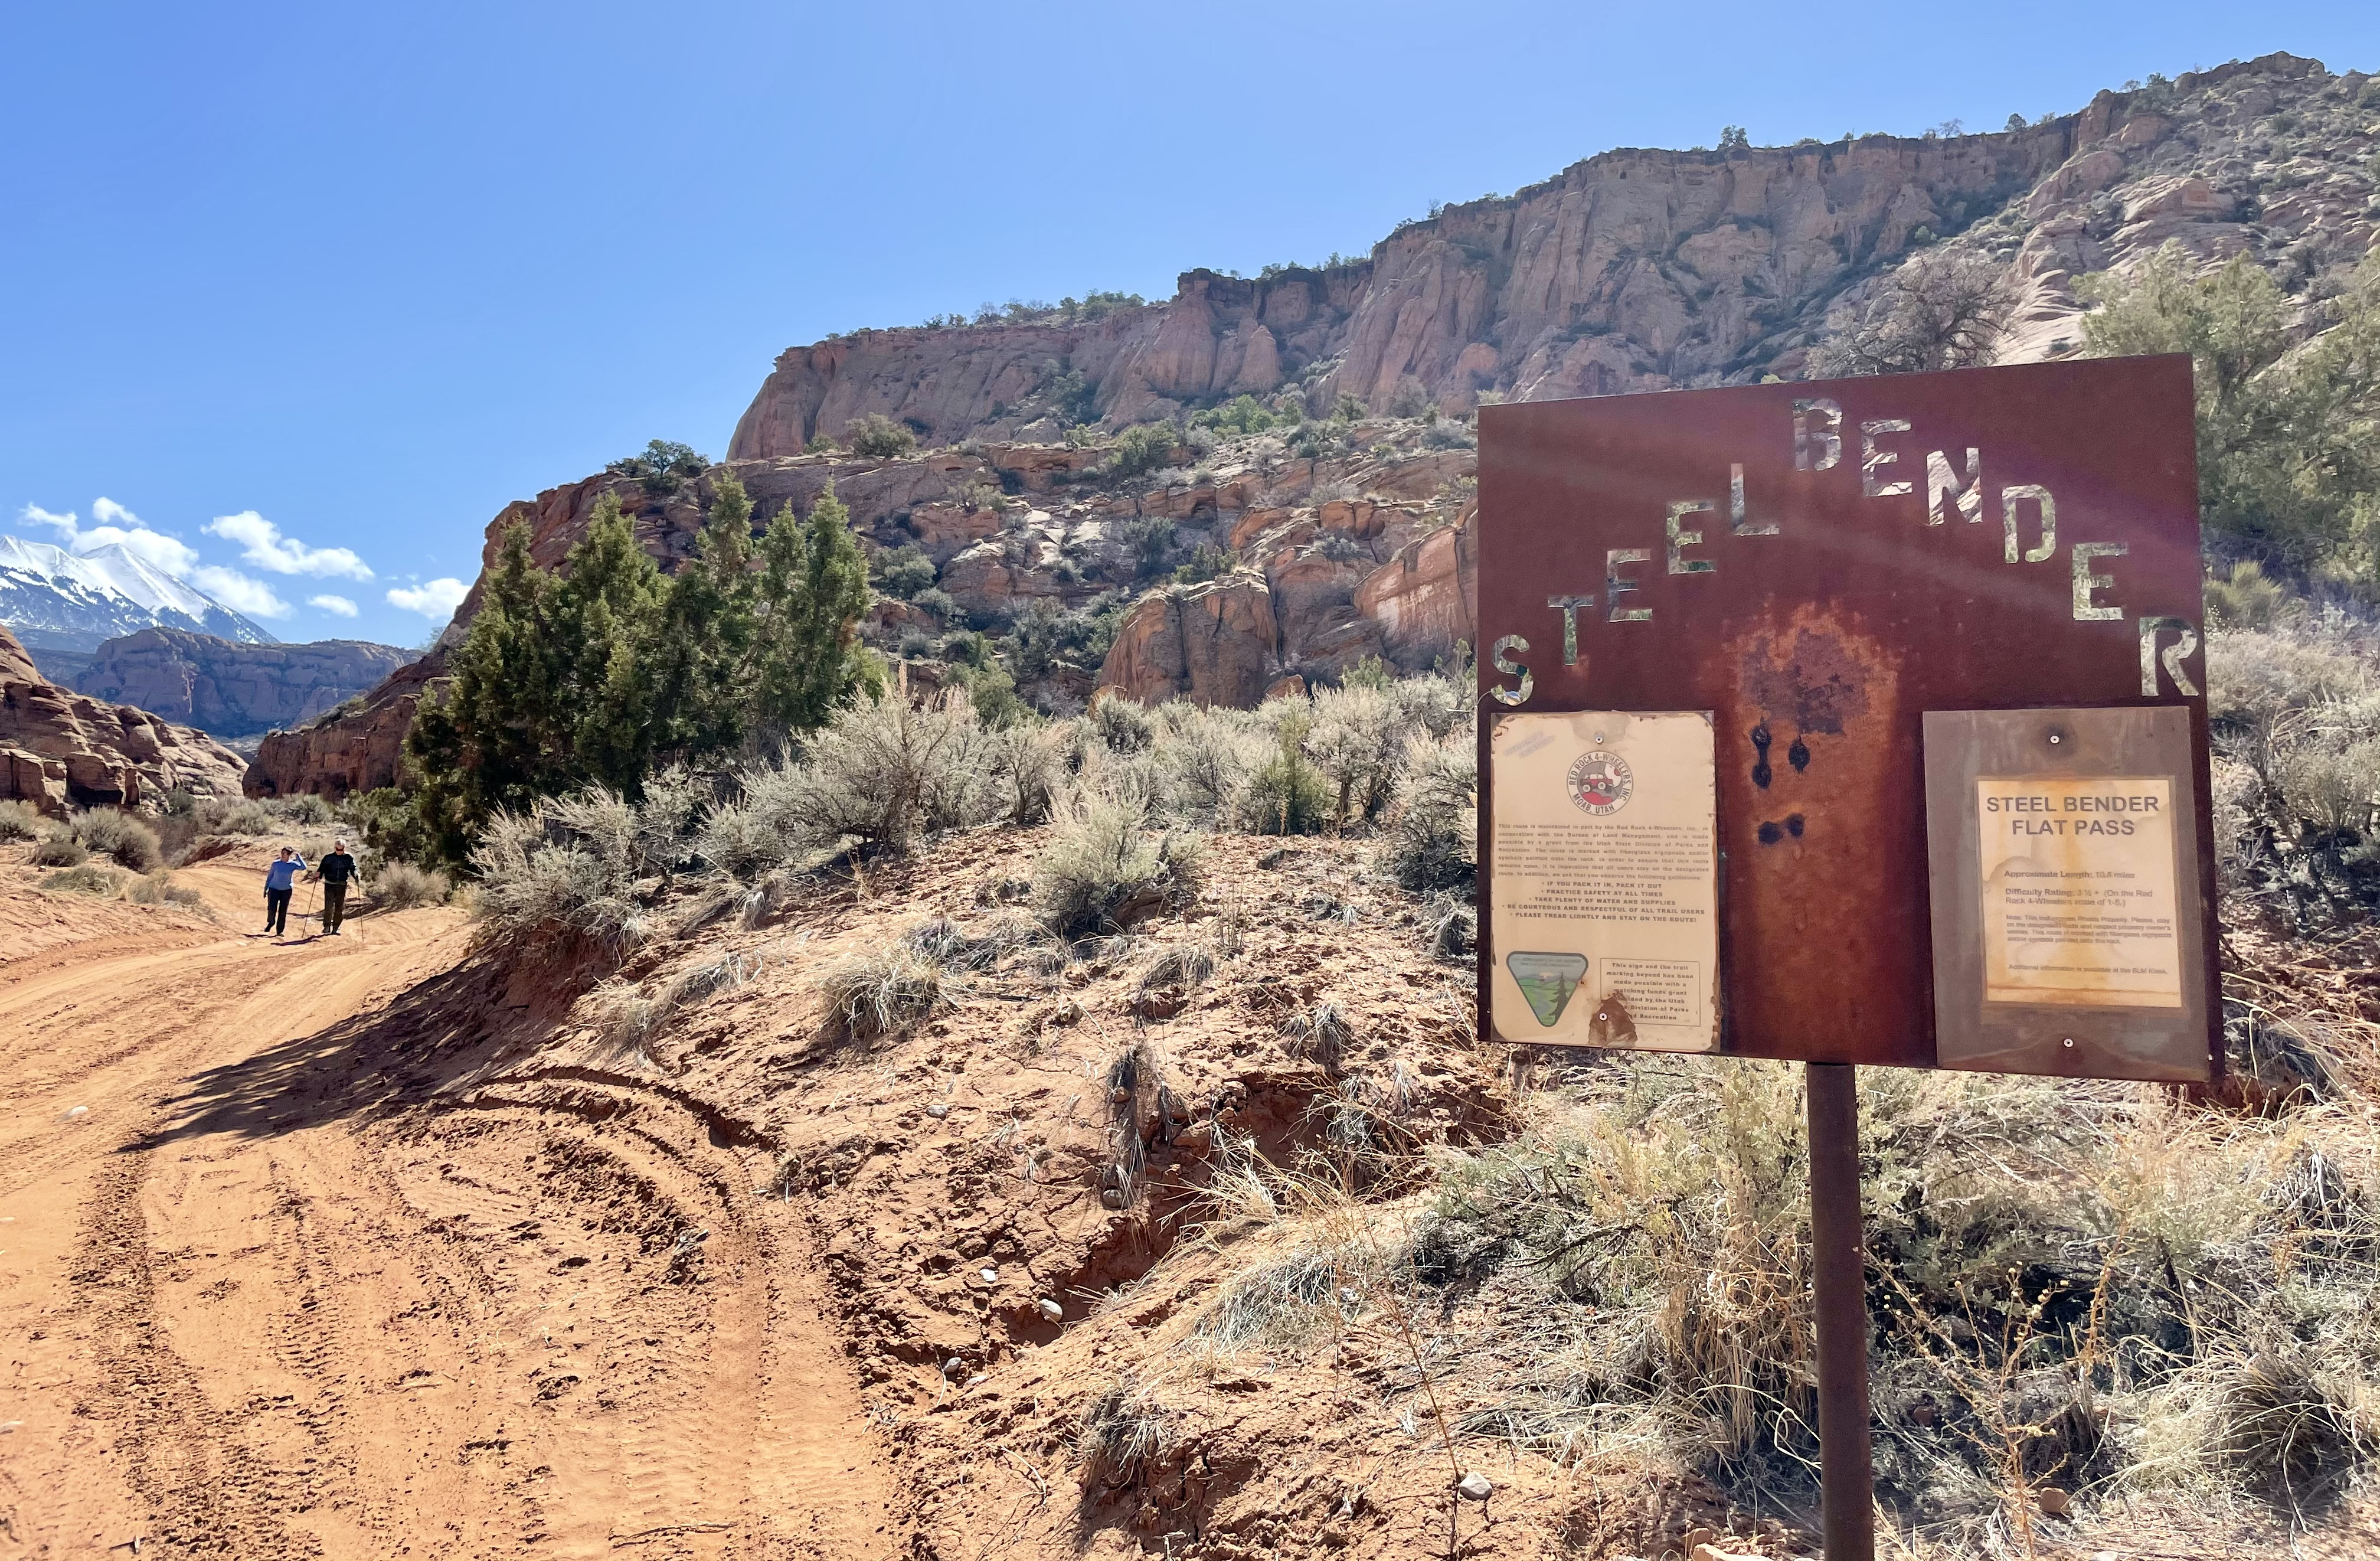 a sign with letters "STEELBENDER" stamped in a chevron pattern displays notices from the Bureau of Land Management about the trail; a couple walks down the trail, toward the viewer, at left